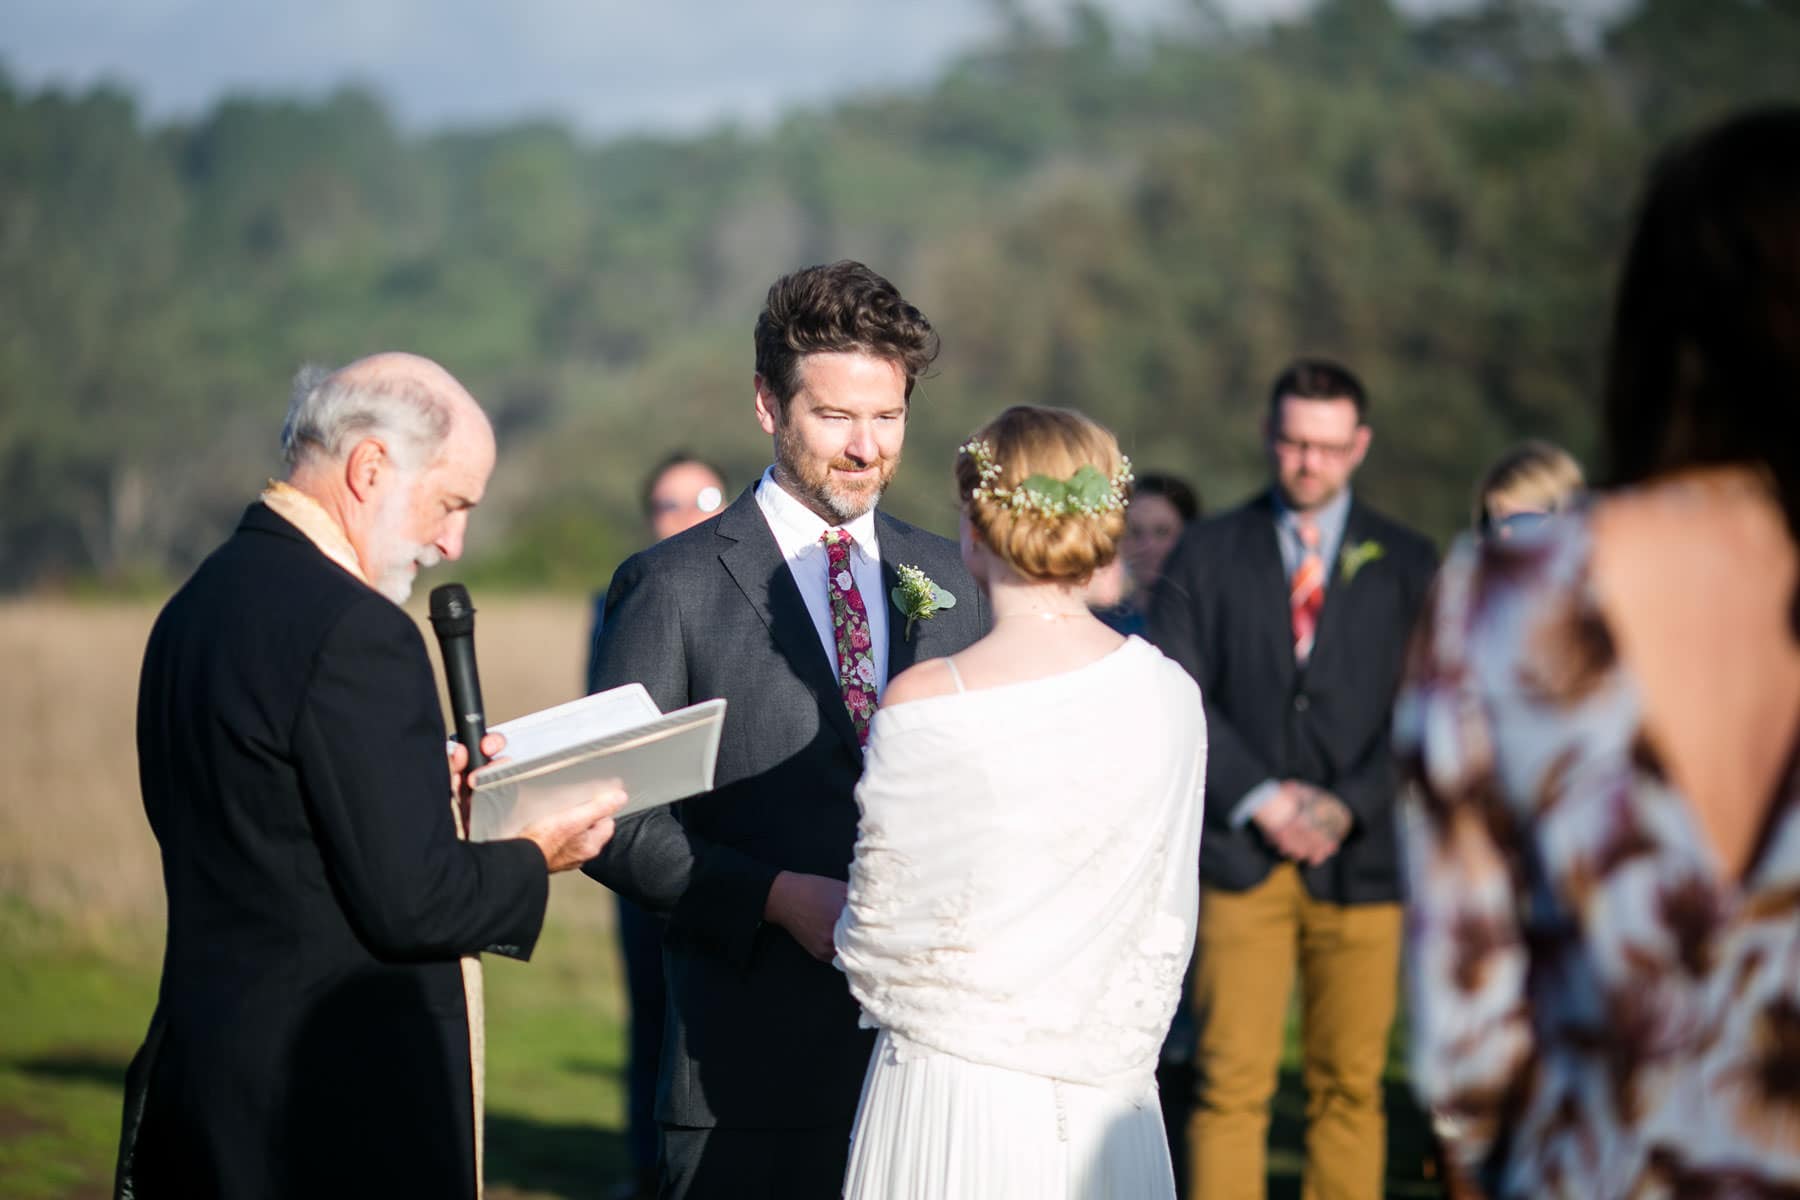 Wedding ceremony outside in the sun